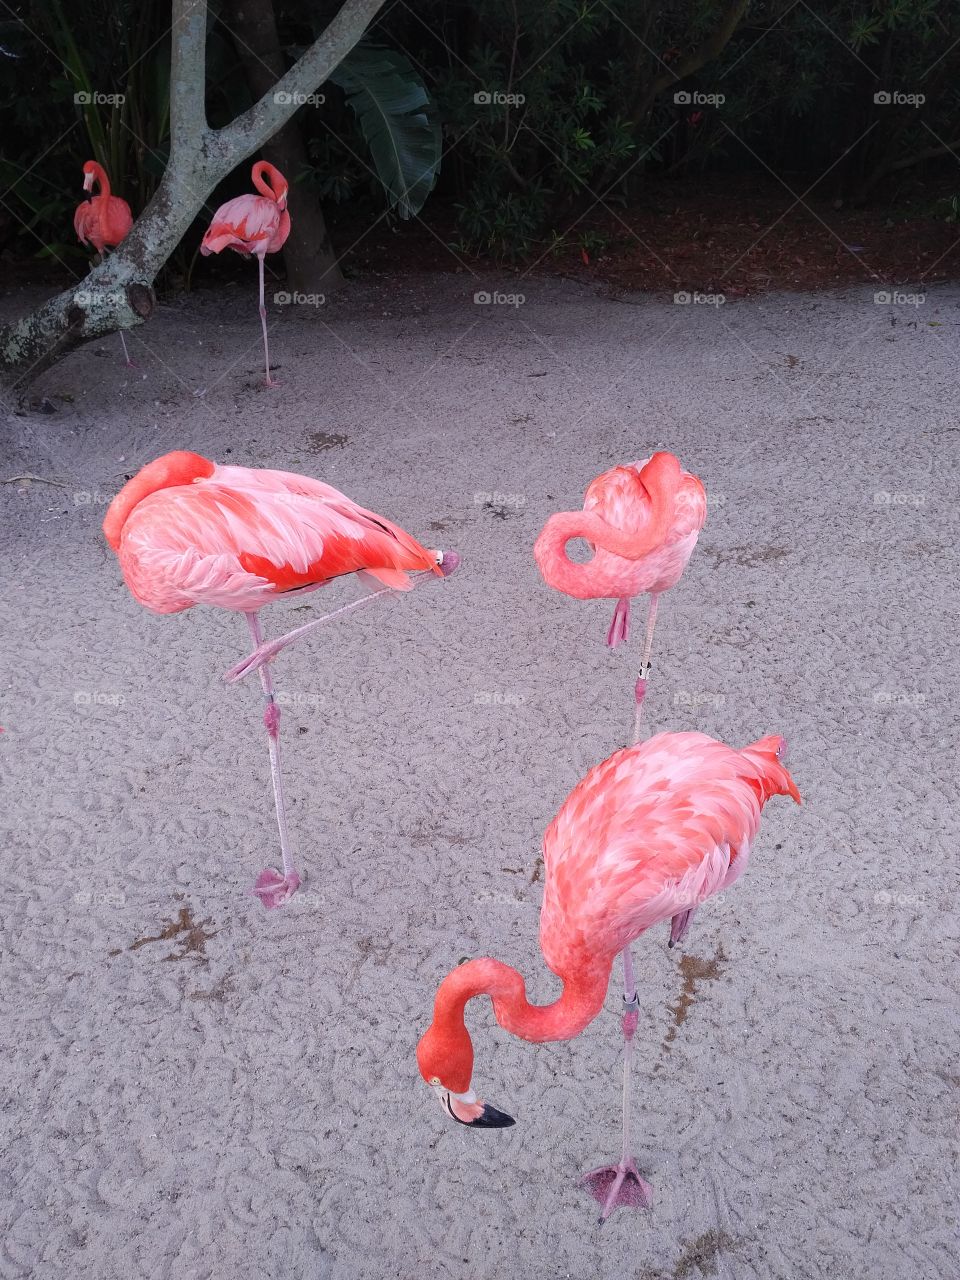 Flamingos doing what they do best